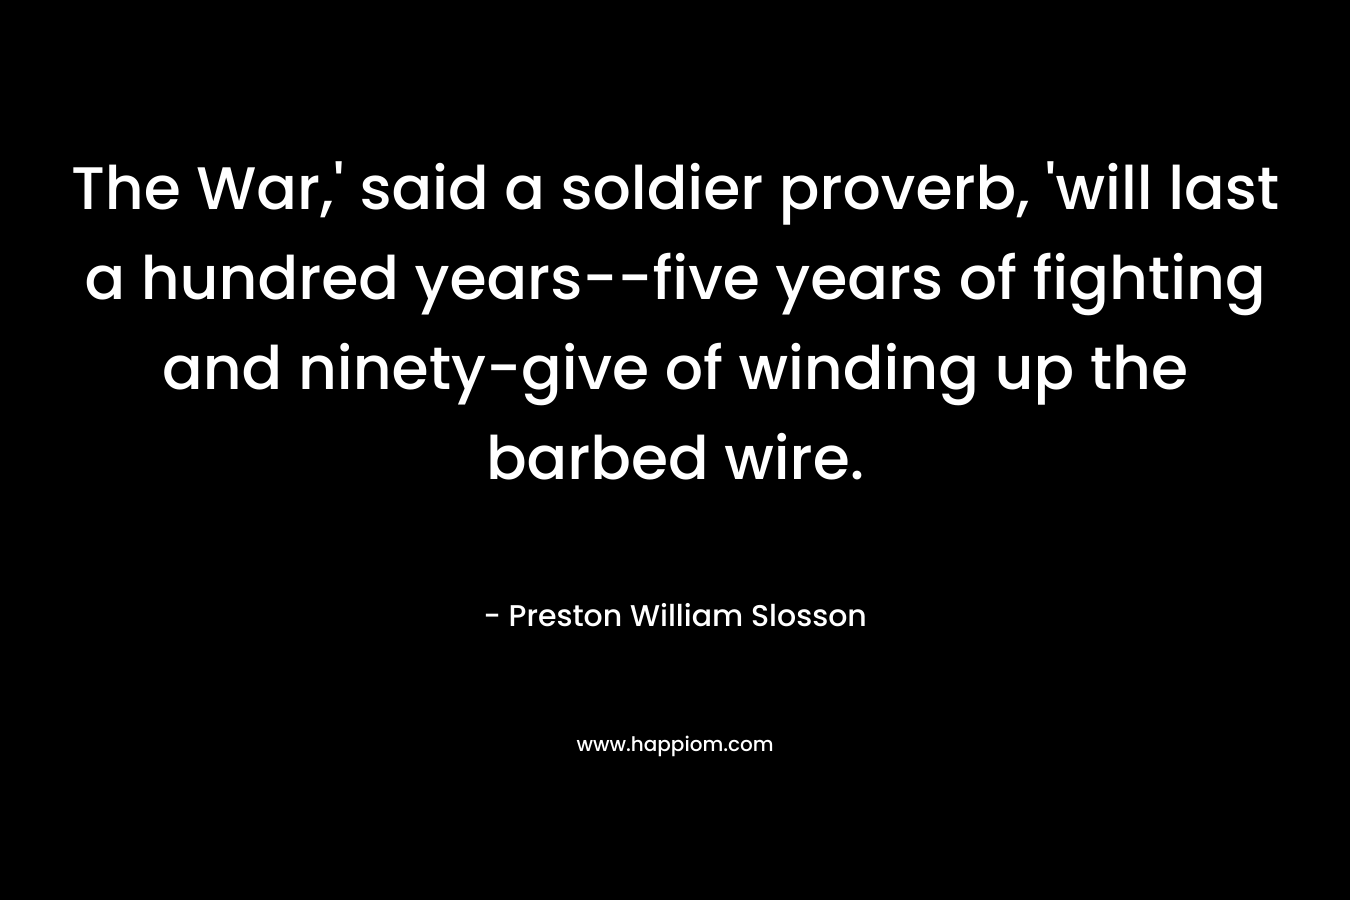 The War,’ said a soldier proverb, ‘will last a hundred years–five years of fighting and ninety-give of winding up the barbed wire. – Preston William Slosson